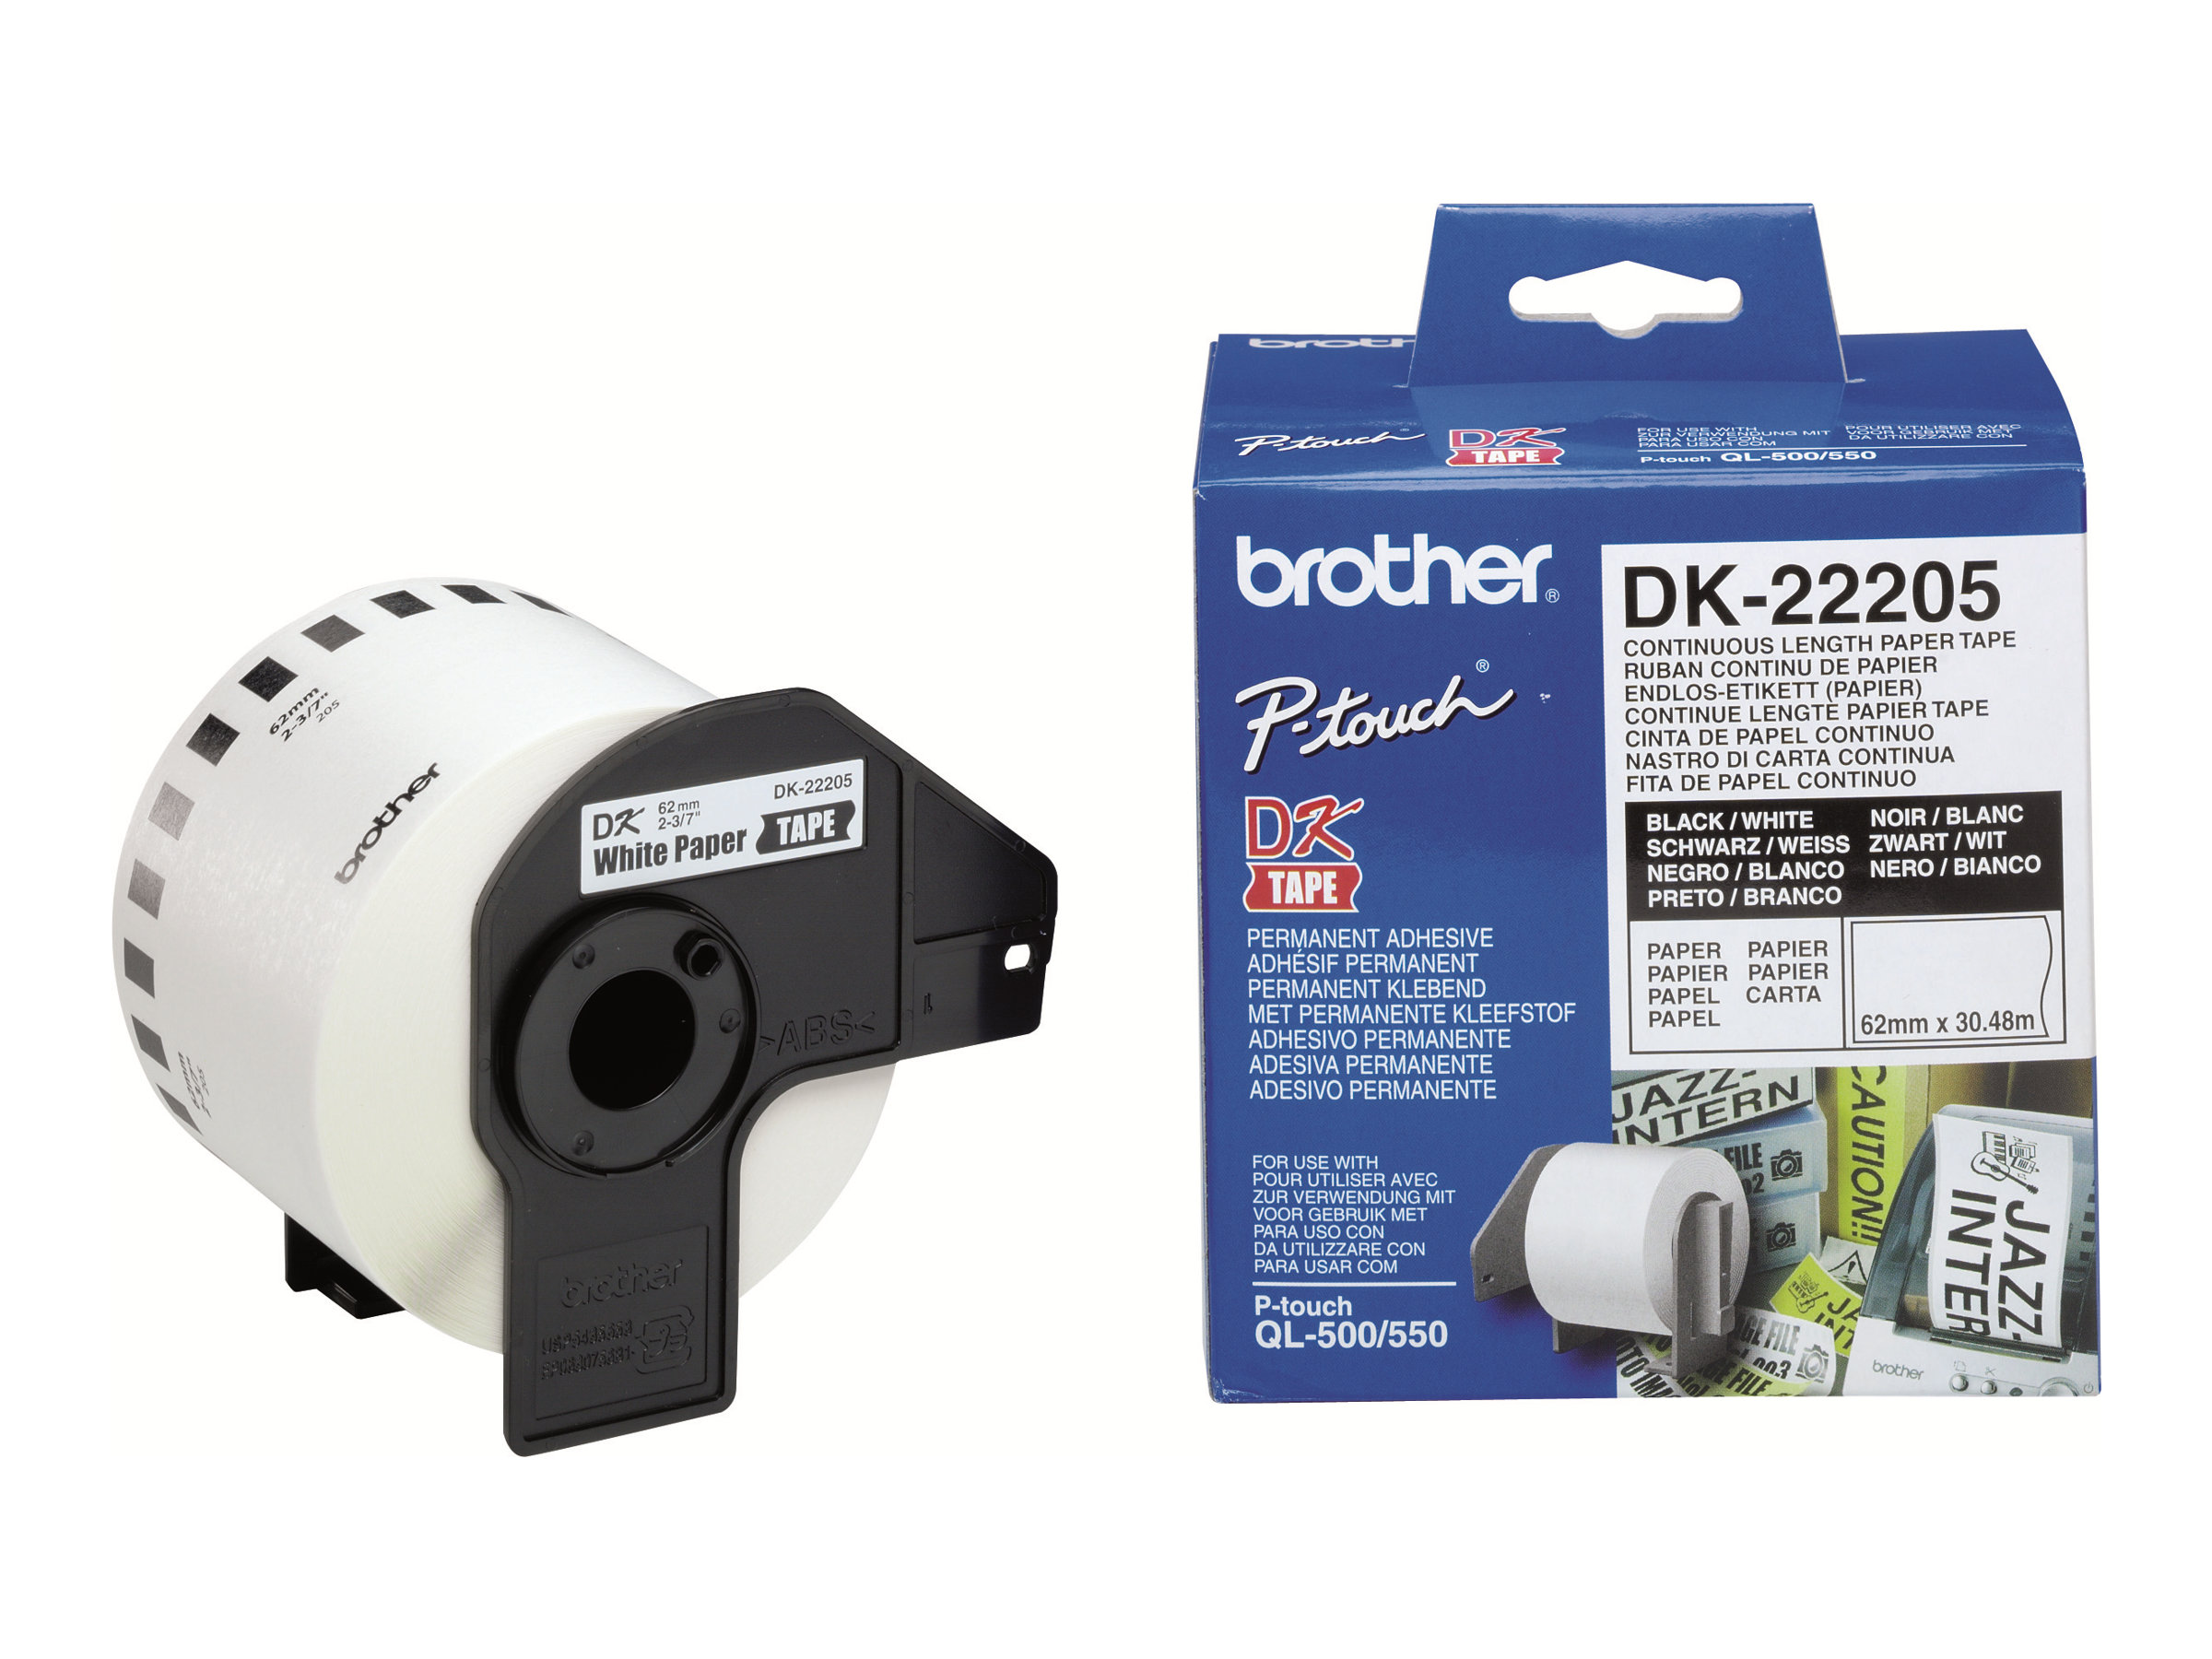 Brother DK-22205 Papier, weiss, L?nge 30,48 m / Breite 62 mm